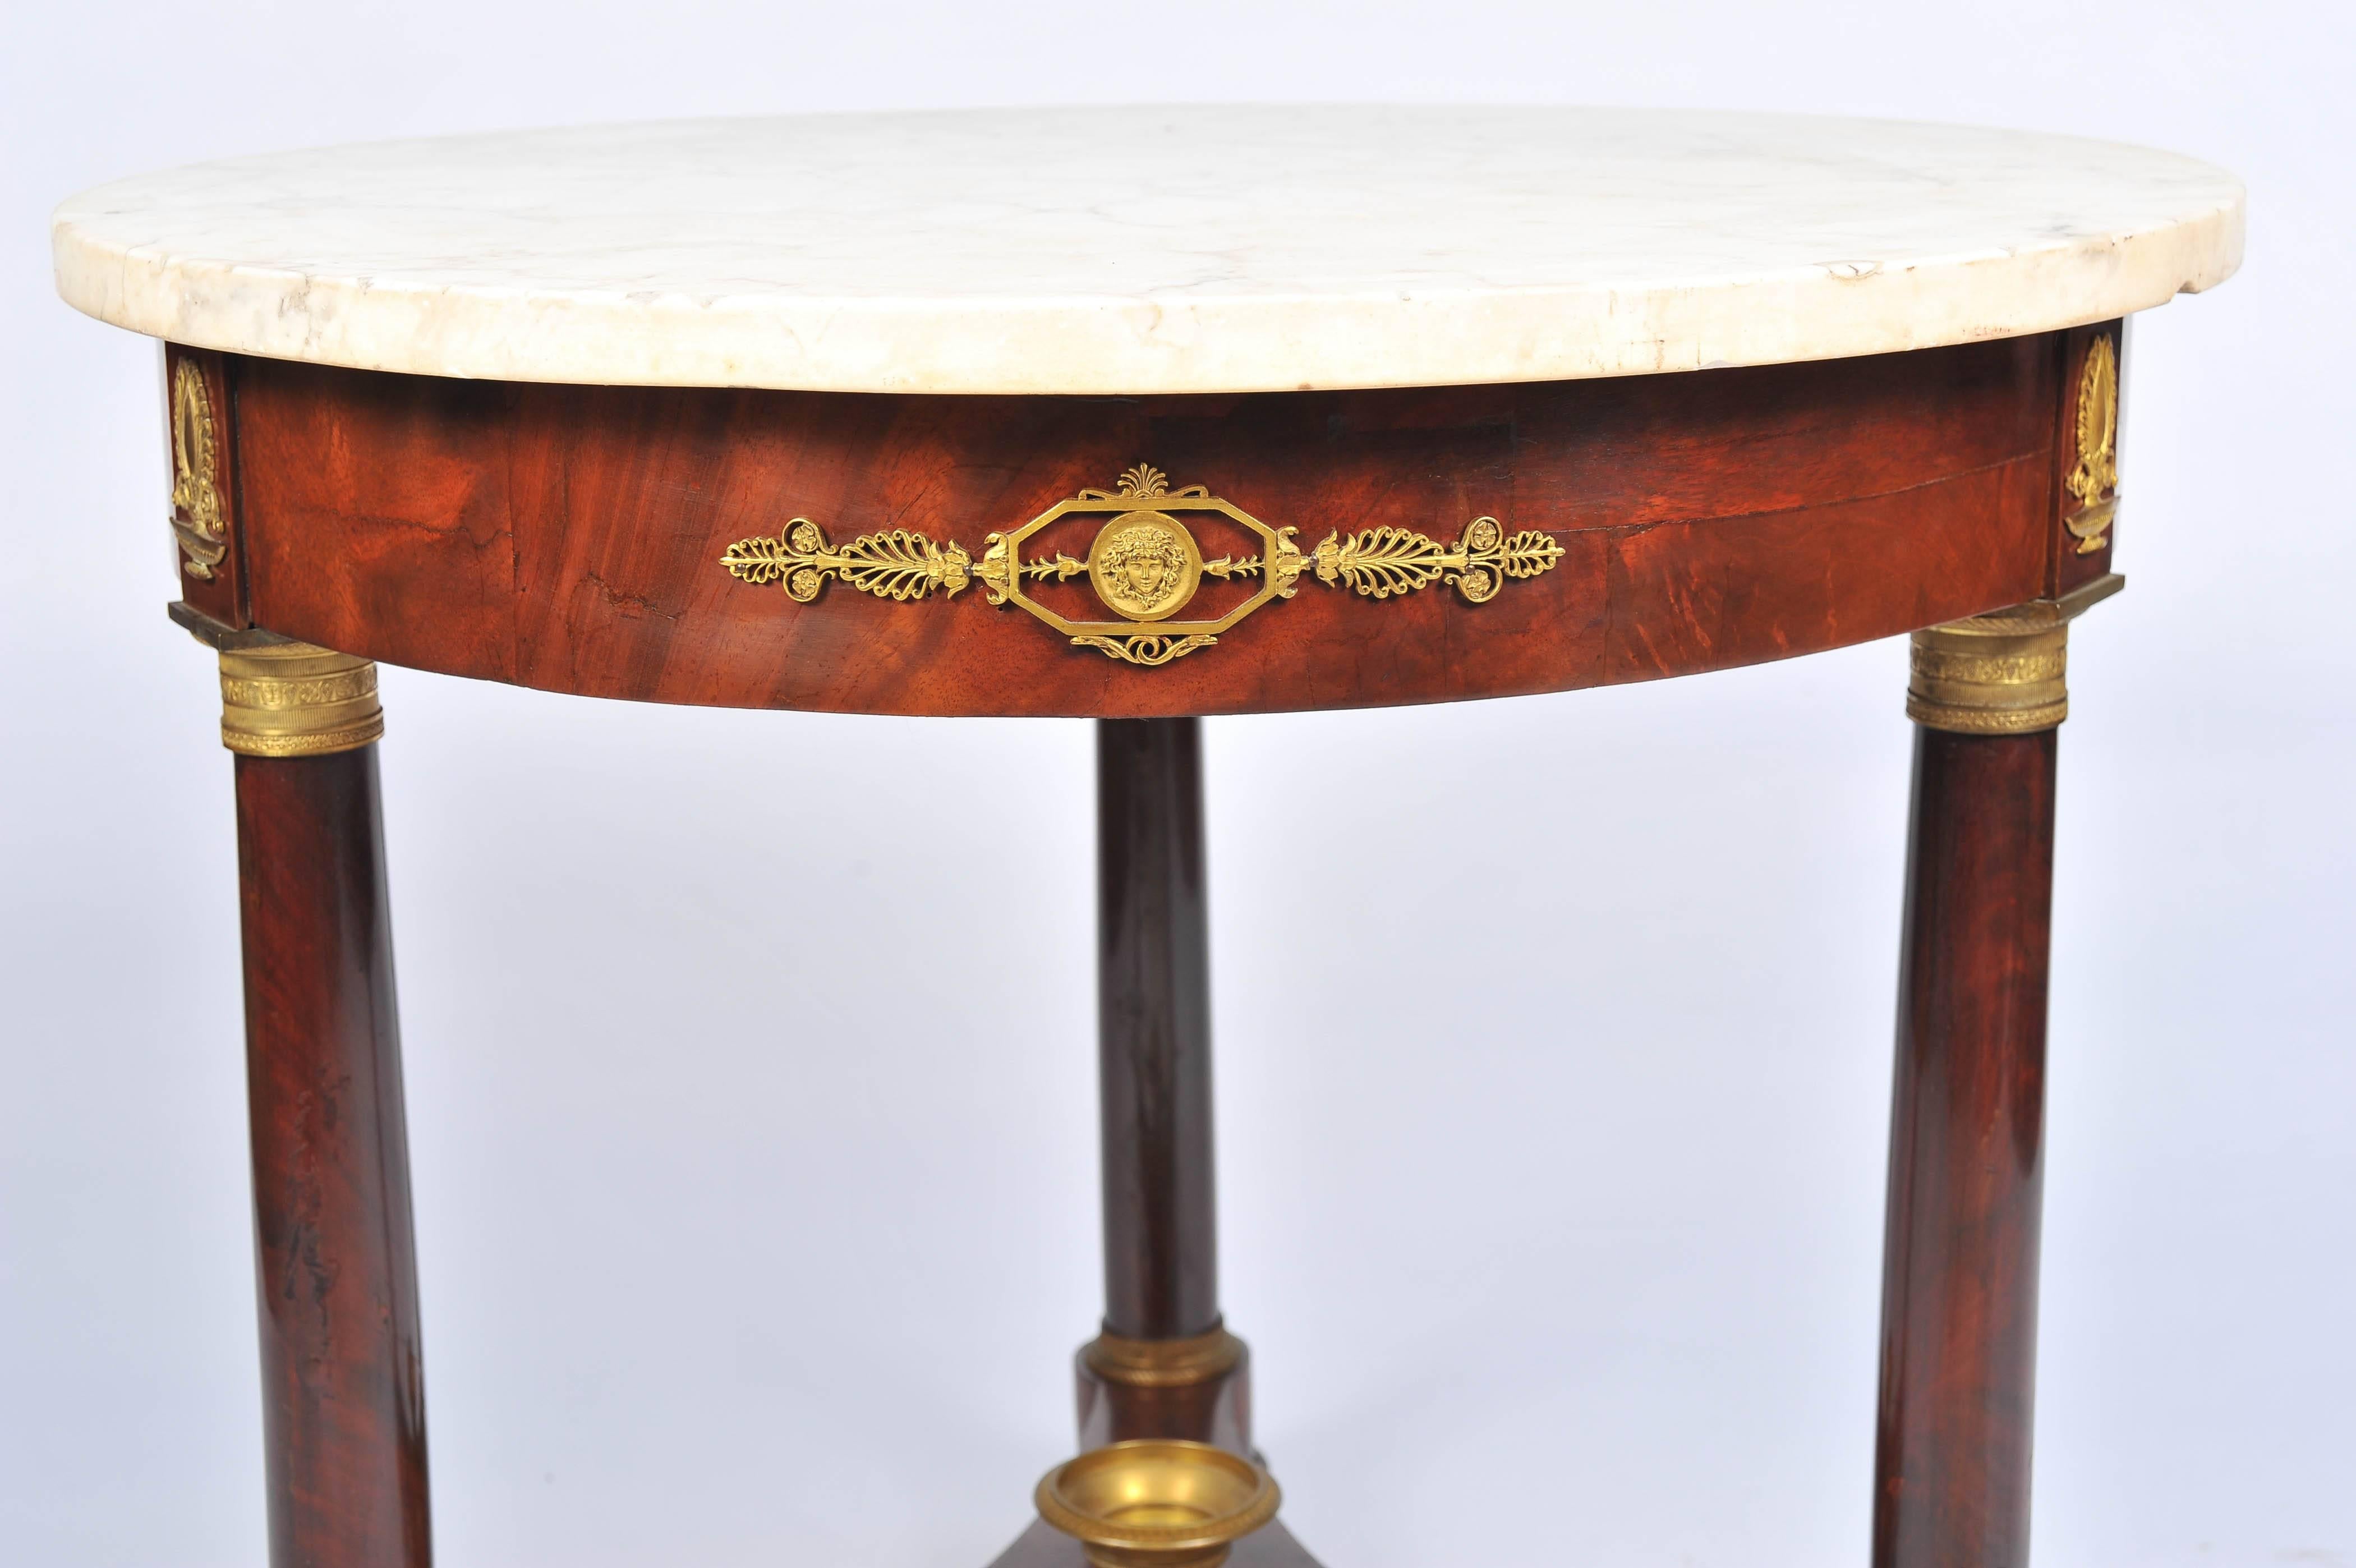 A good quality French 19th century Empire influenced Gueridon, marble topped with gilded ormolu-mounted, mahogany veneered, raised on three round turned legs, united by a triform stretched with an urn in the middle and raised on castors.